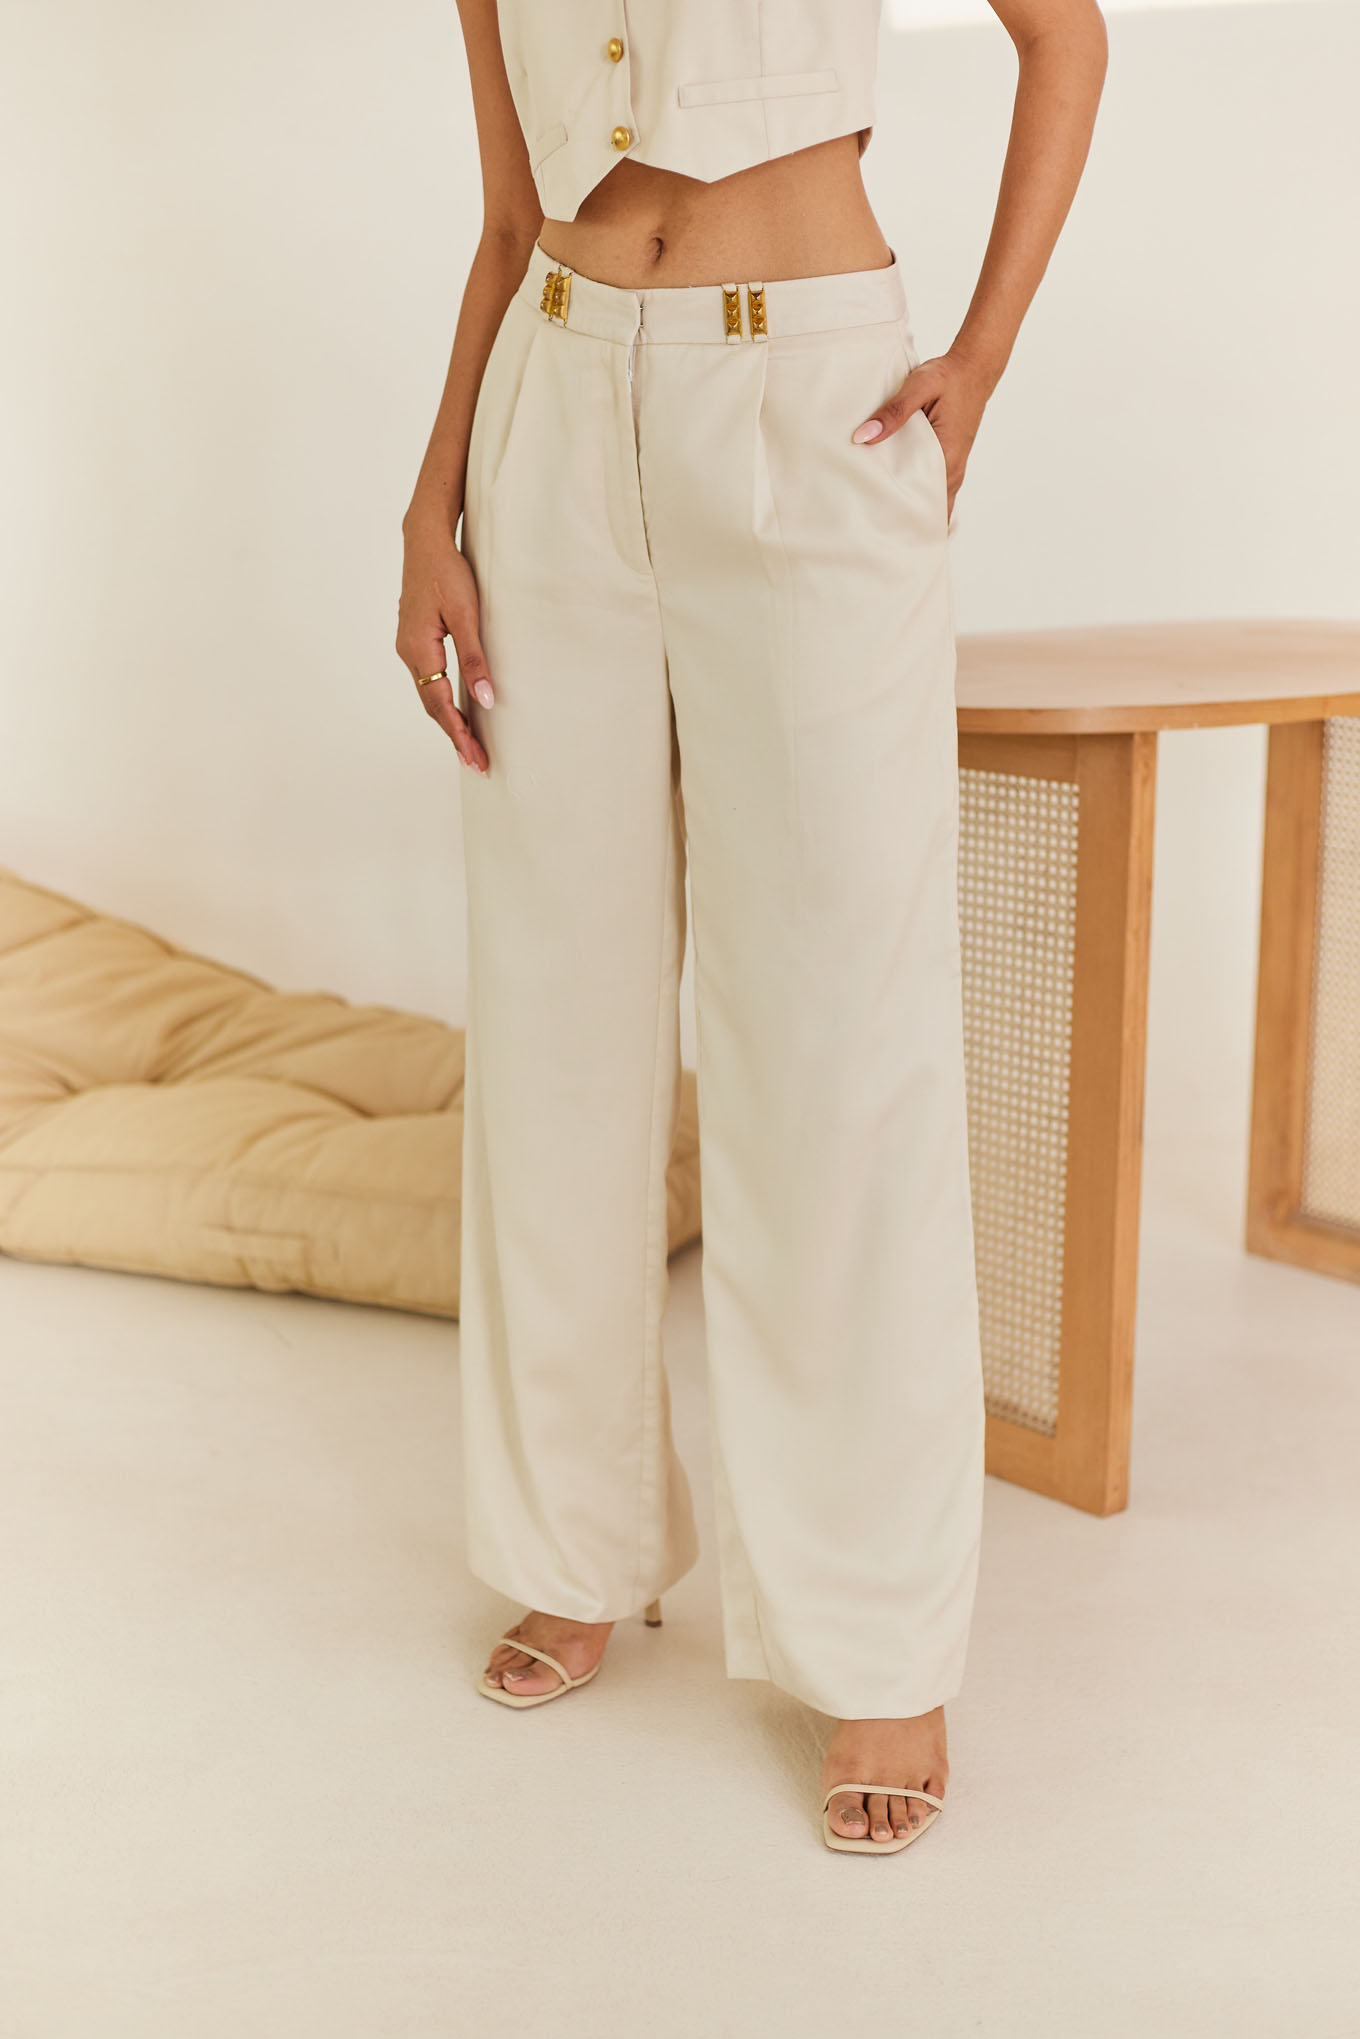 Buy FABALLEY Solid Crepe Regular Fit Women's Wide Leg Trousers | Shoppers  Stop